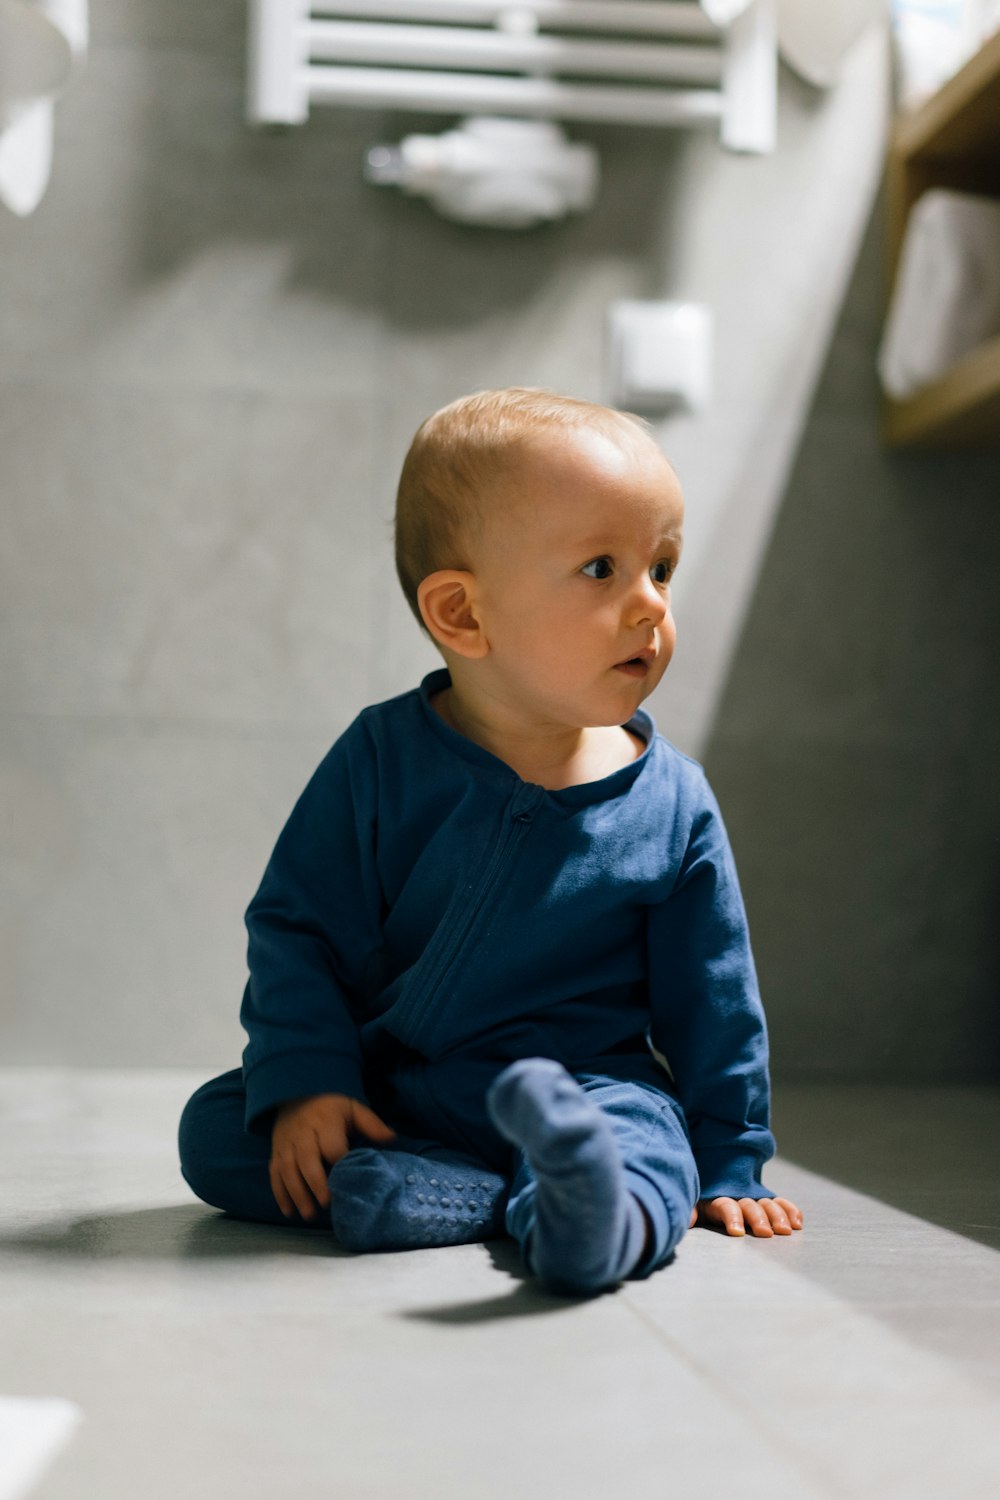 baby in blue long sleeve shirt and blue denim jeans sitting on floor